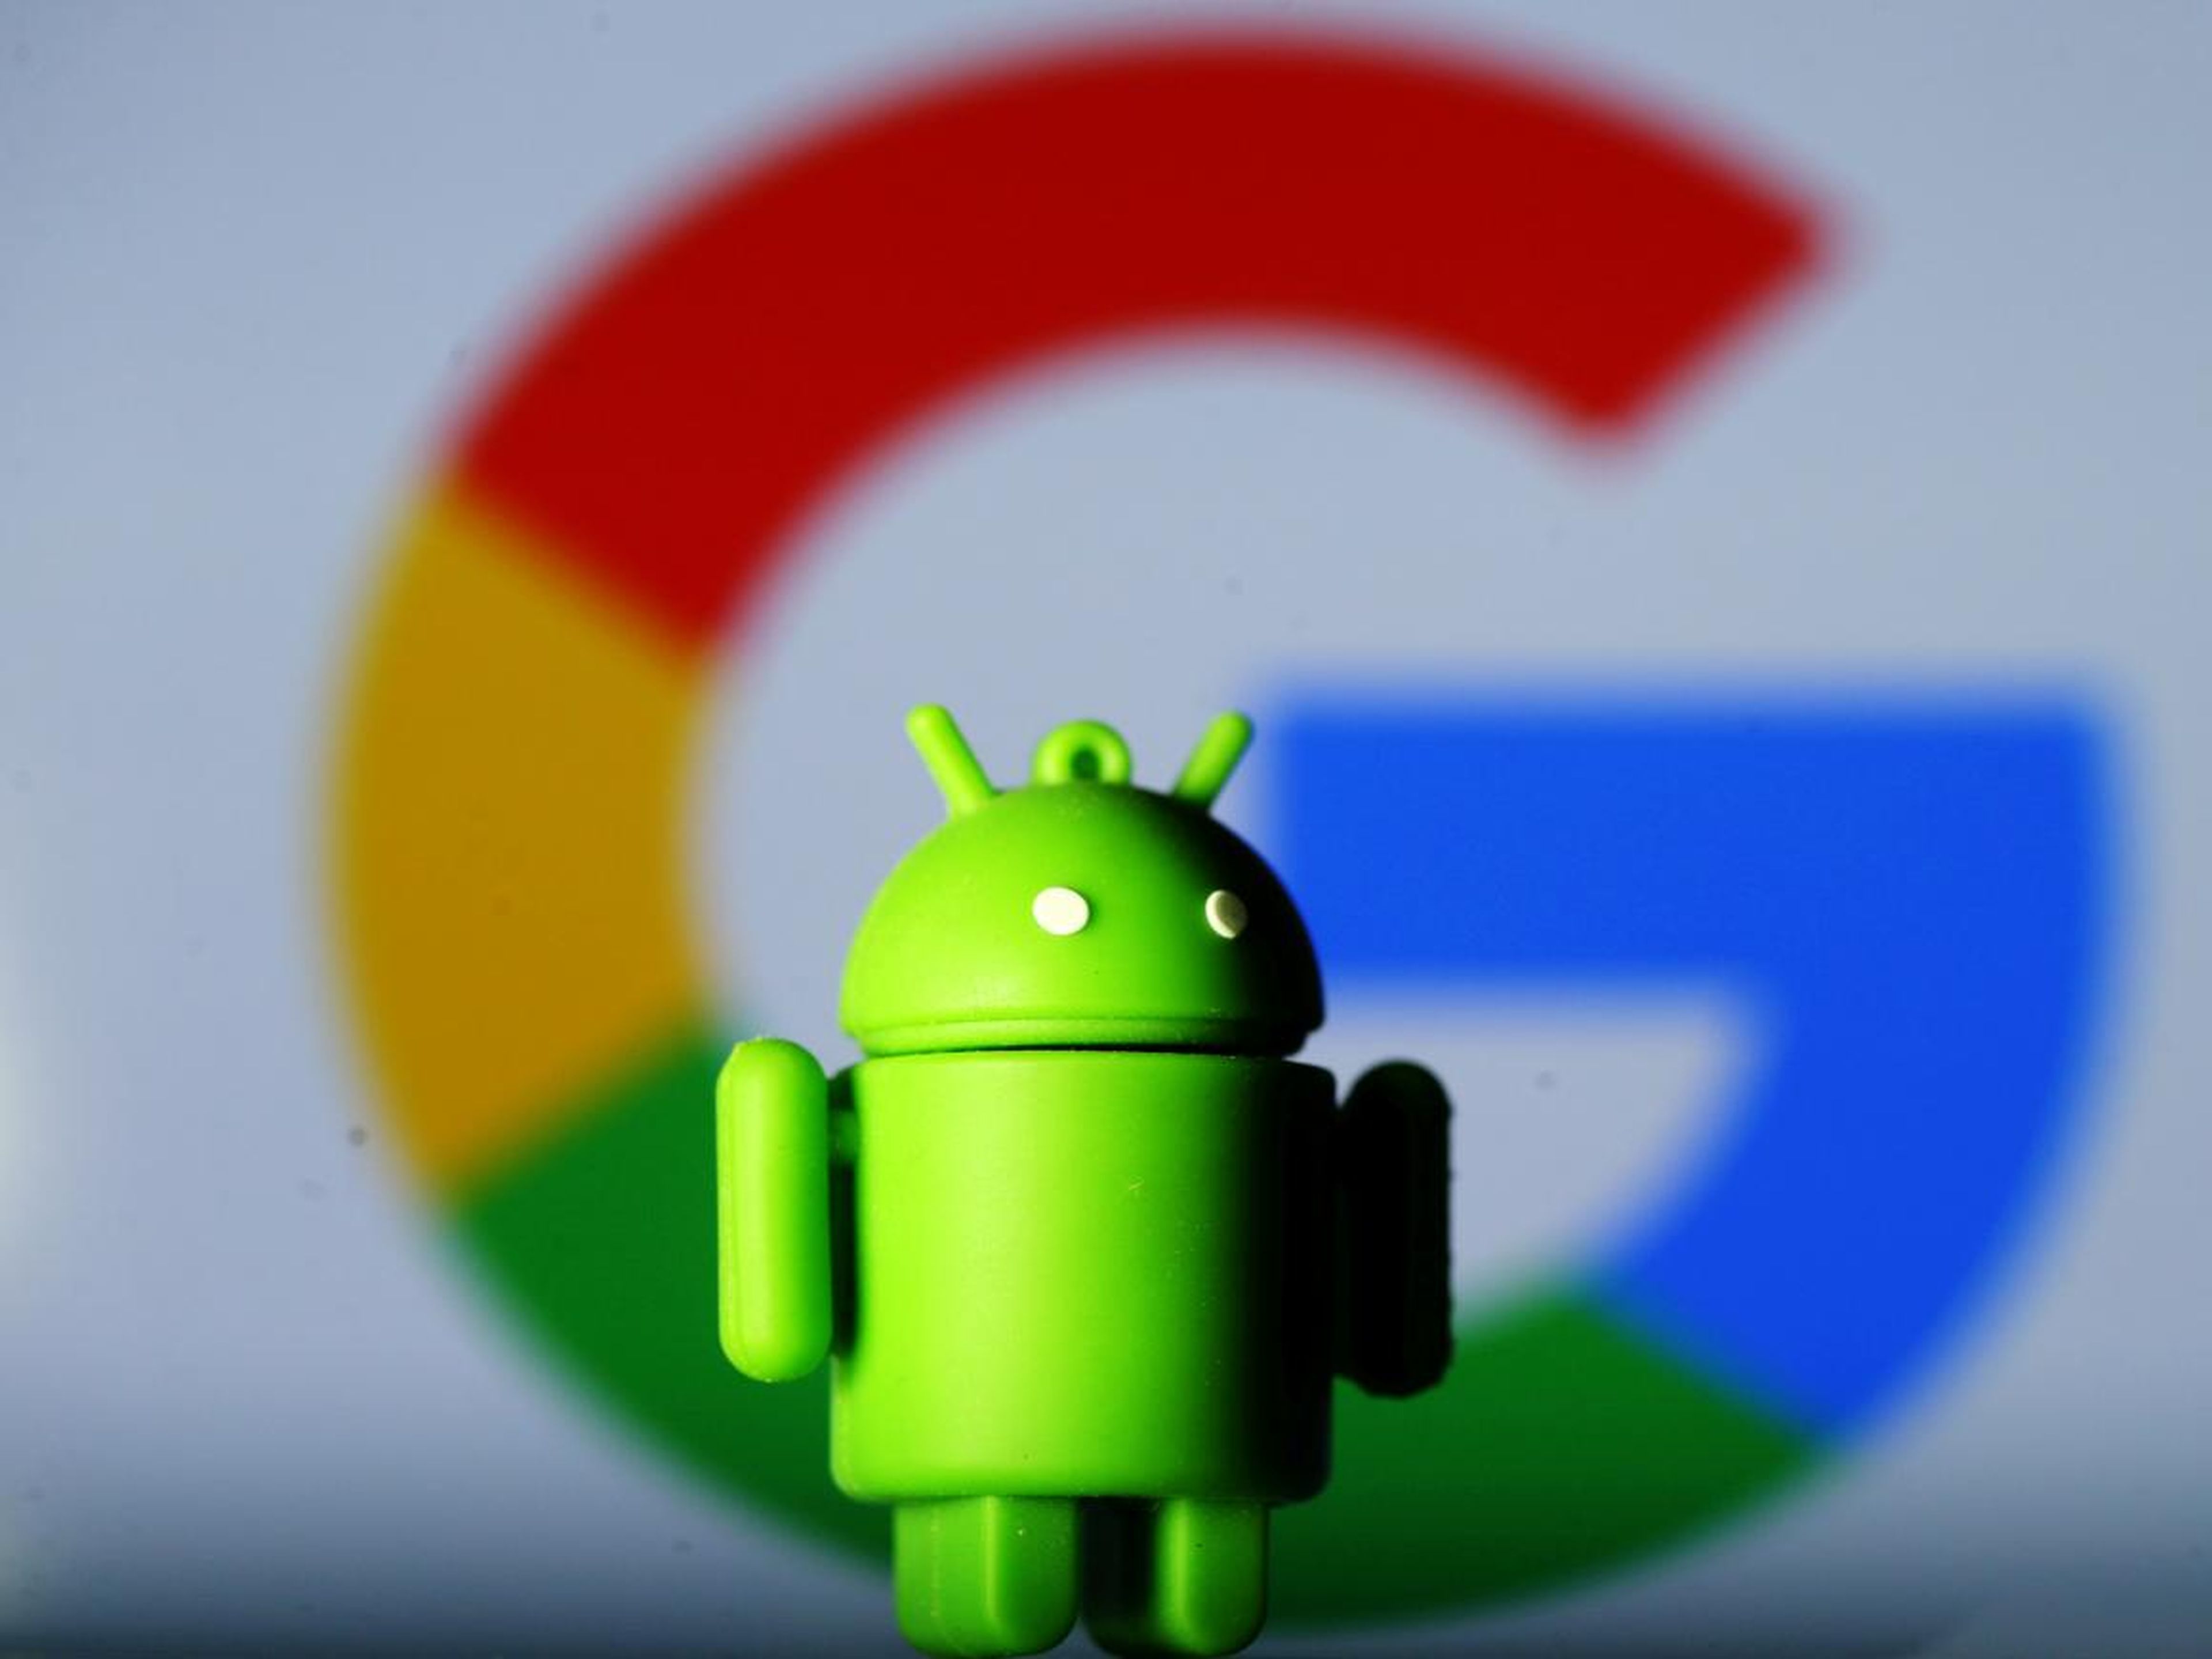 Google may be quietly preparing to add one of the iPhone's most coveted features to Android